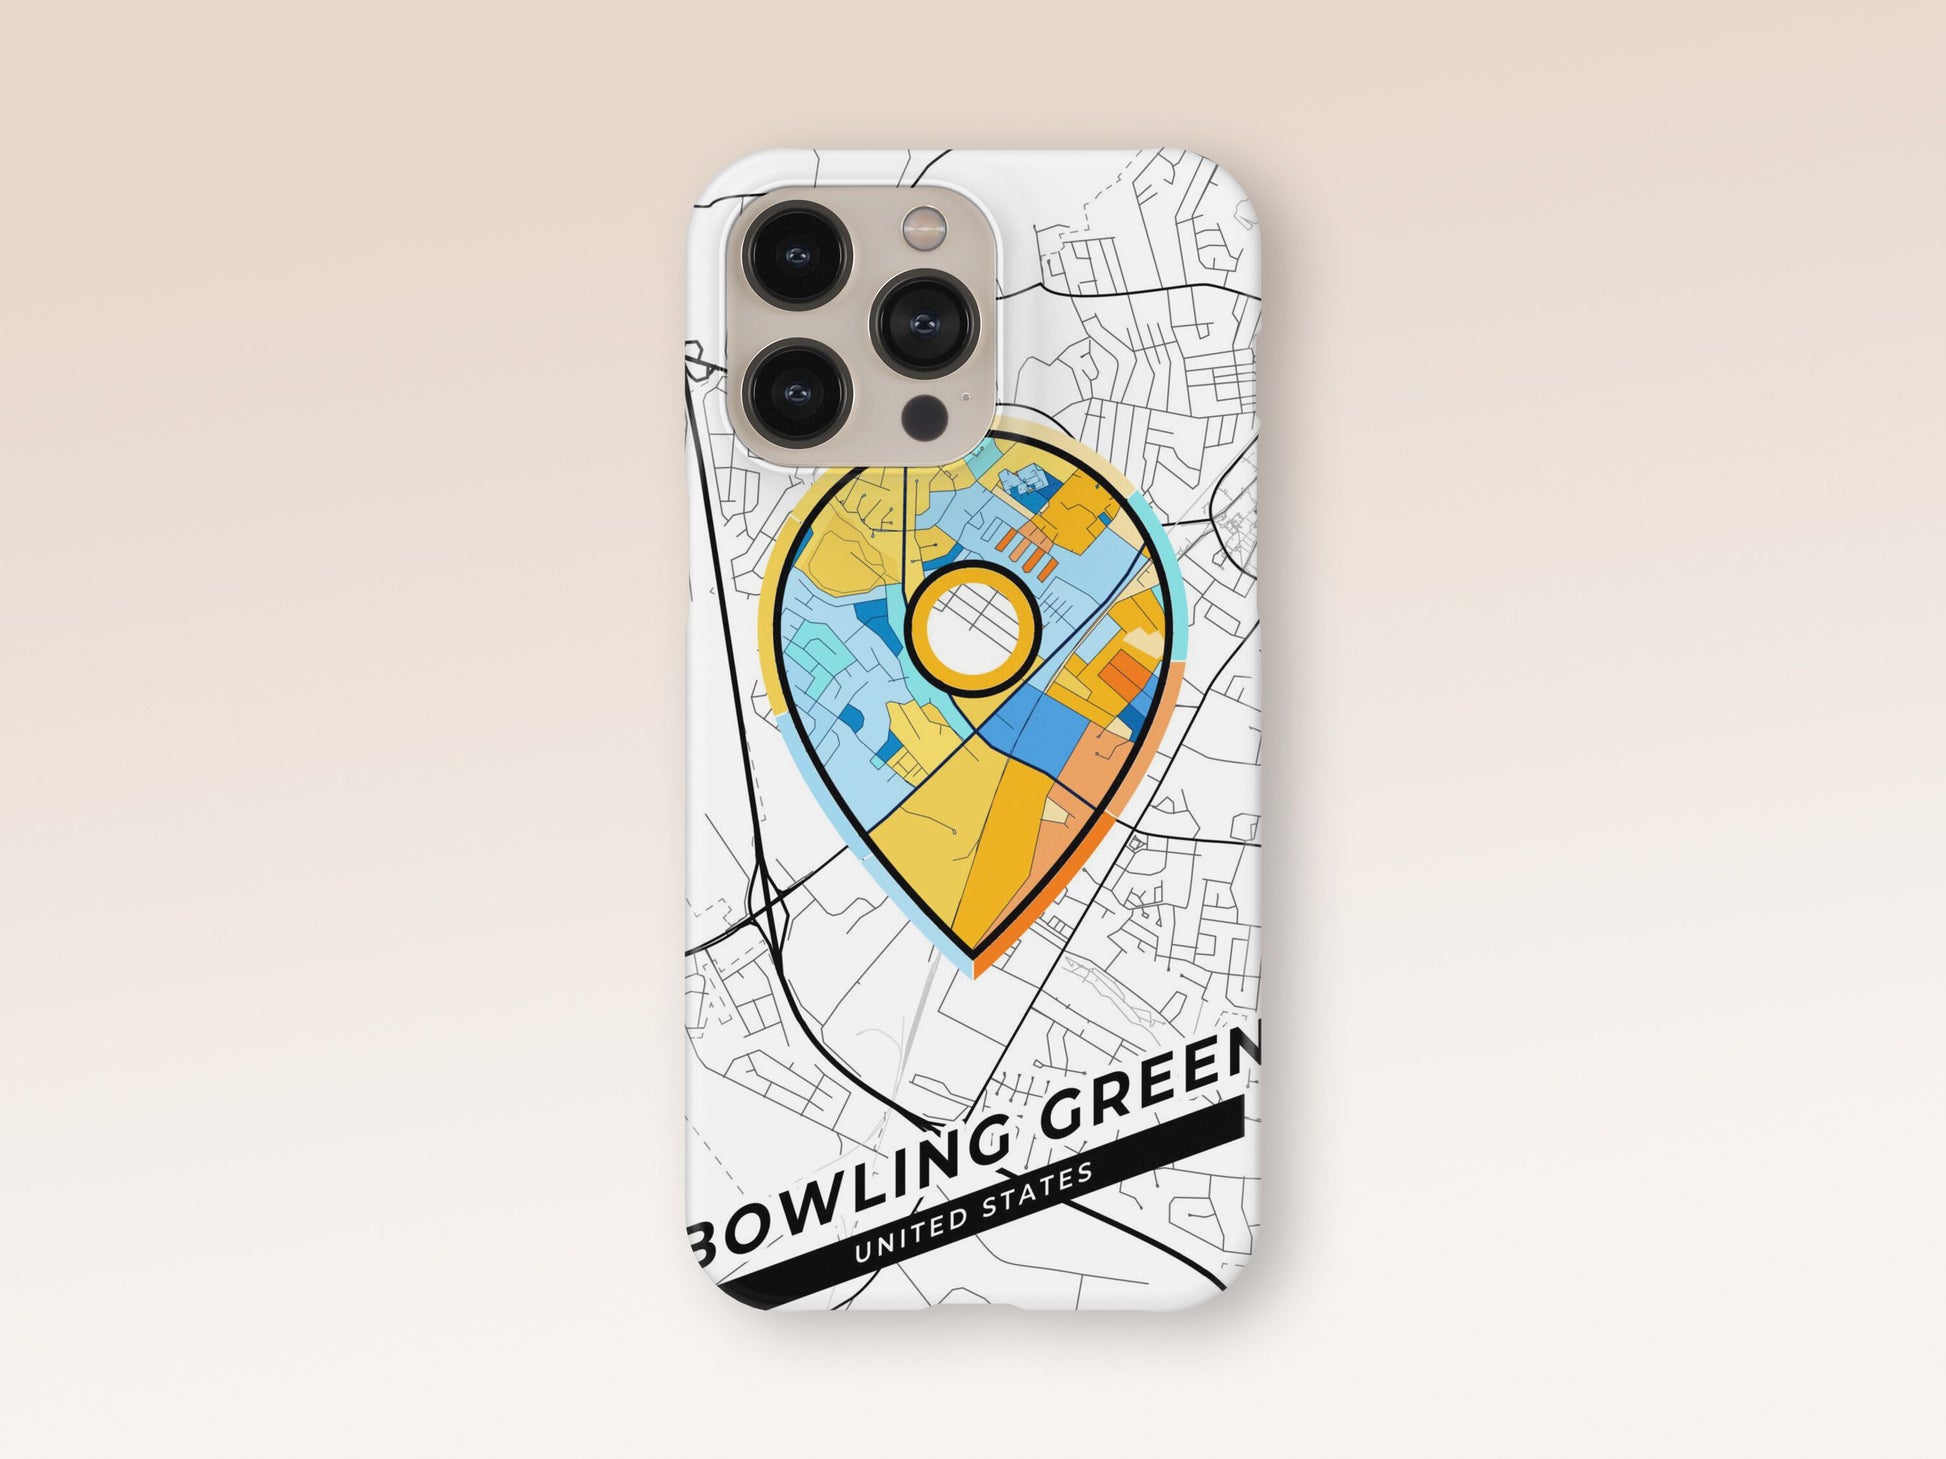 Bowling Green Kentucky slim phone case with colorful icon. Birthday, wedding or housewarming gift. Couple match cases. 1